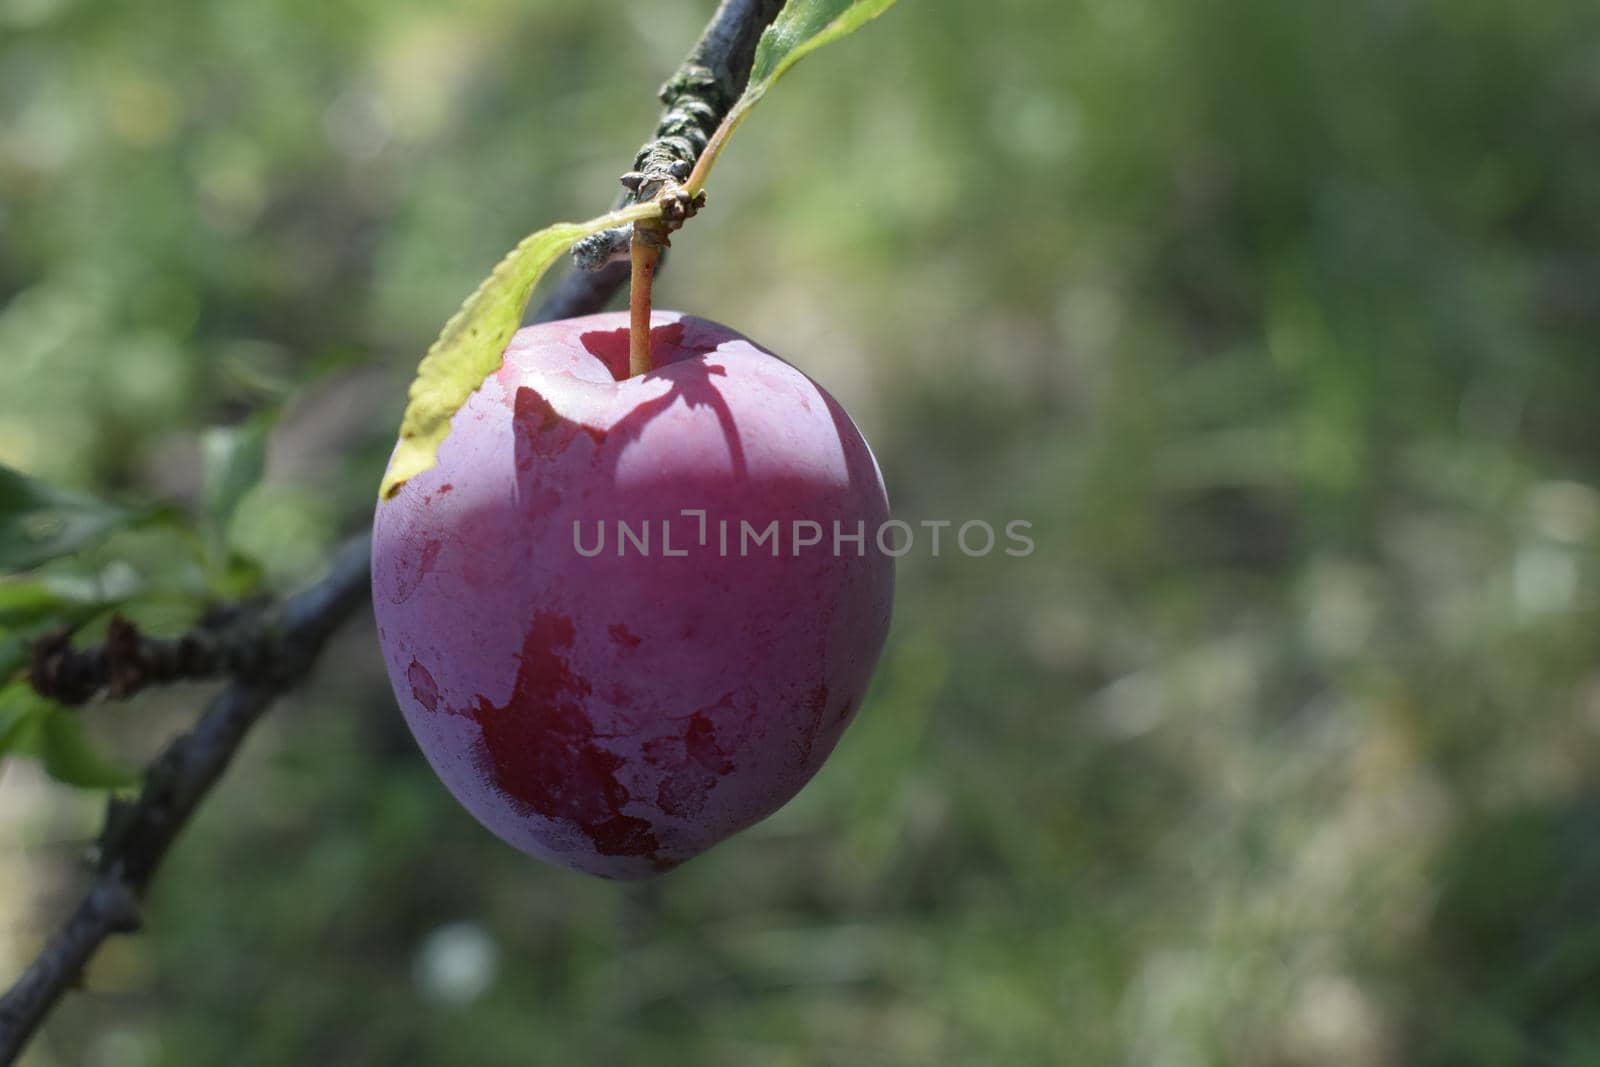 Plum tree with fruit. Closeup of delicious ripe plums on tree branch in garden. Red plum fruits on branch with green leaves growing in the garden.